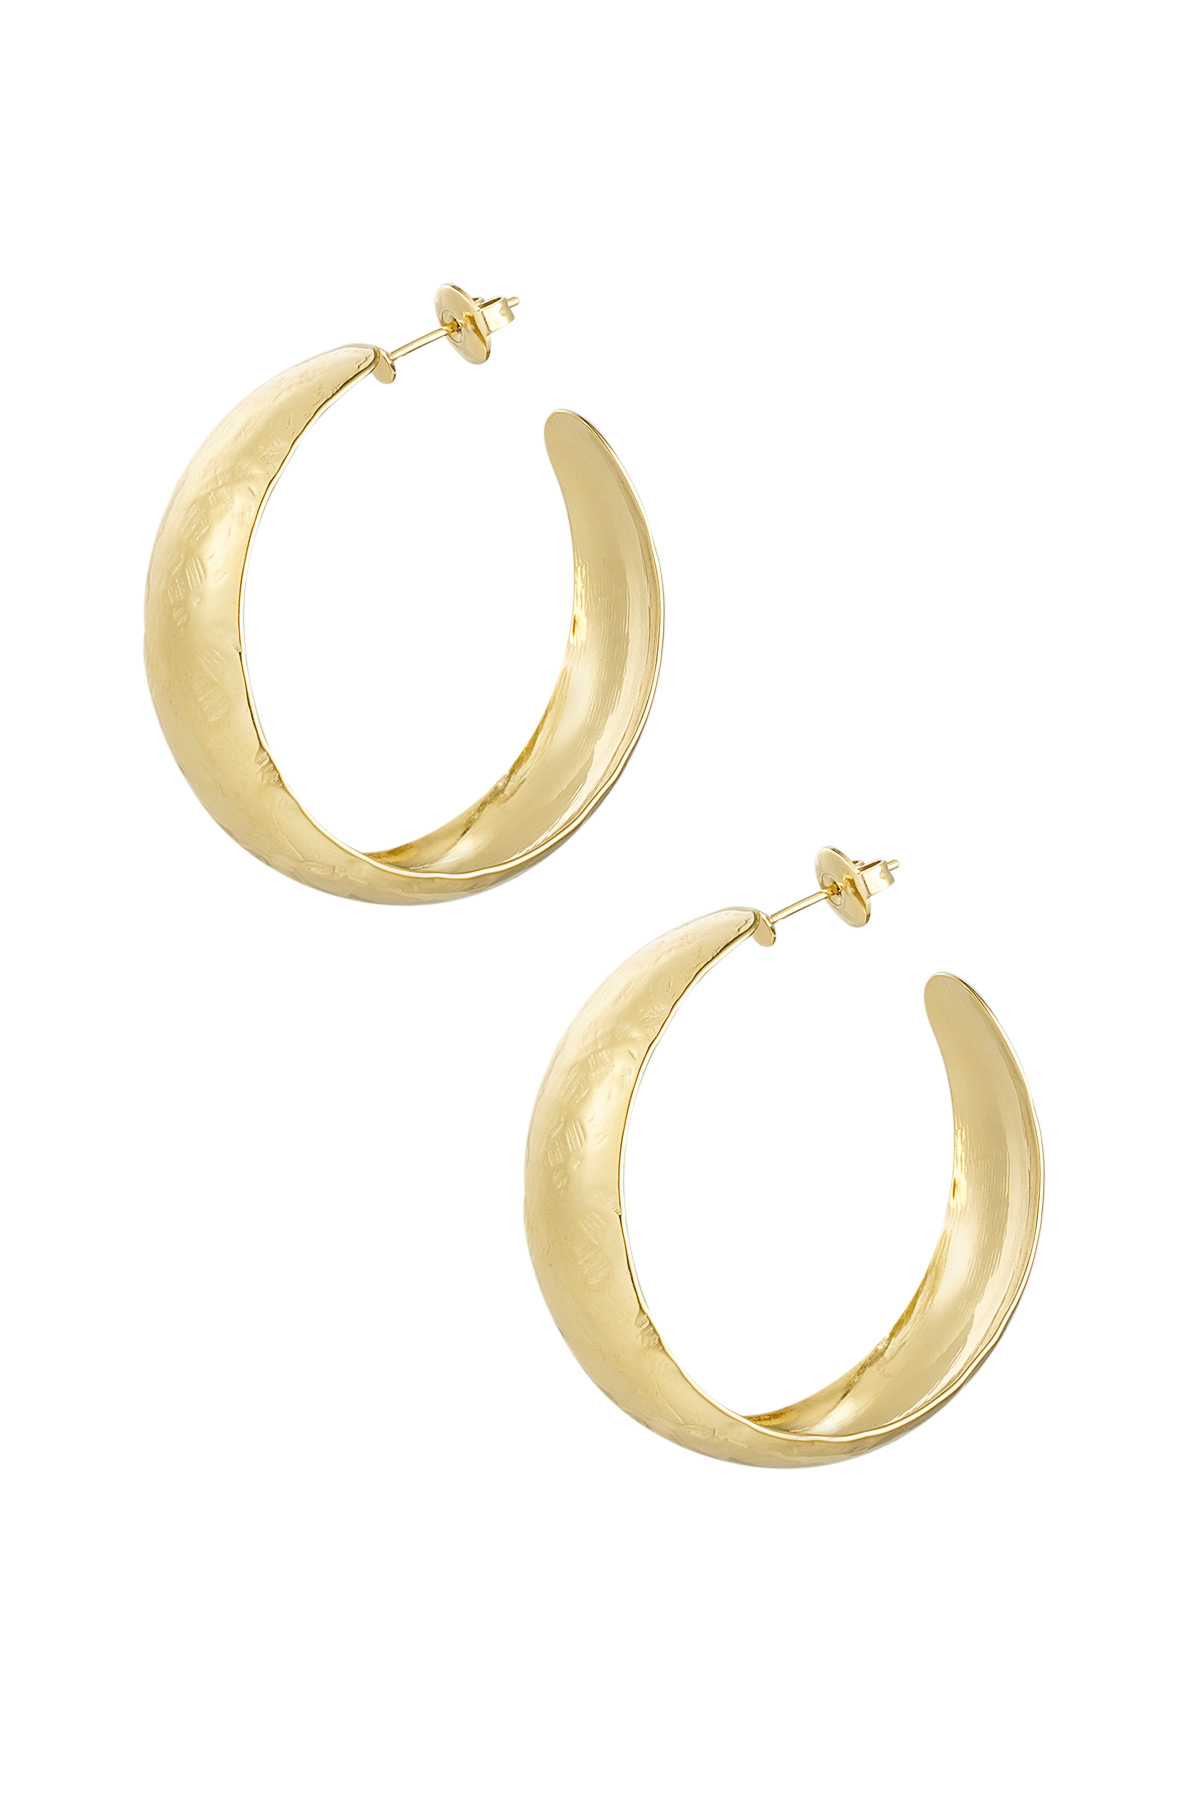 Earrings subtle structure - gold h5 